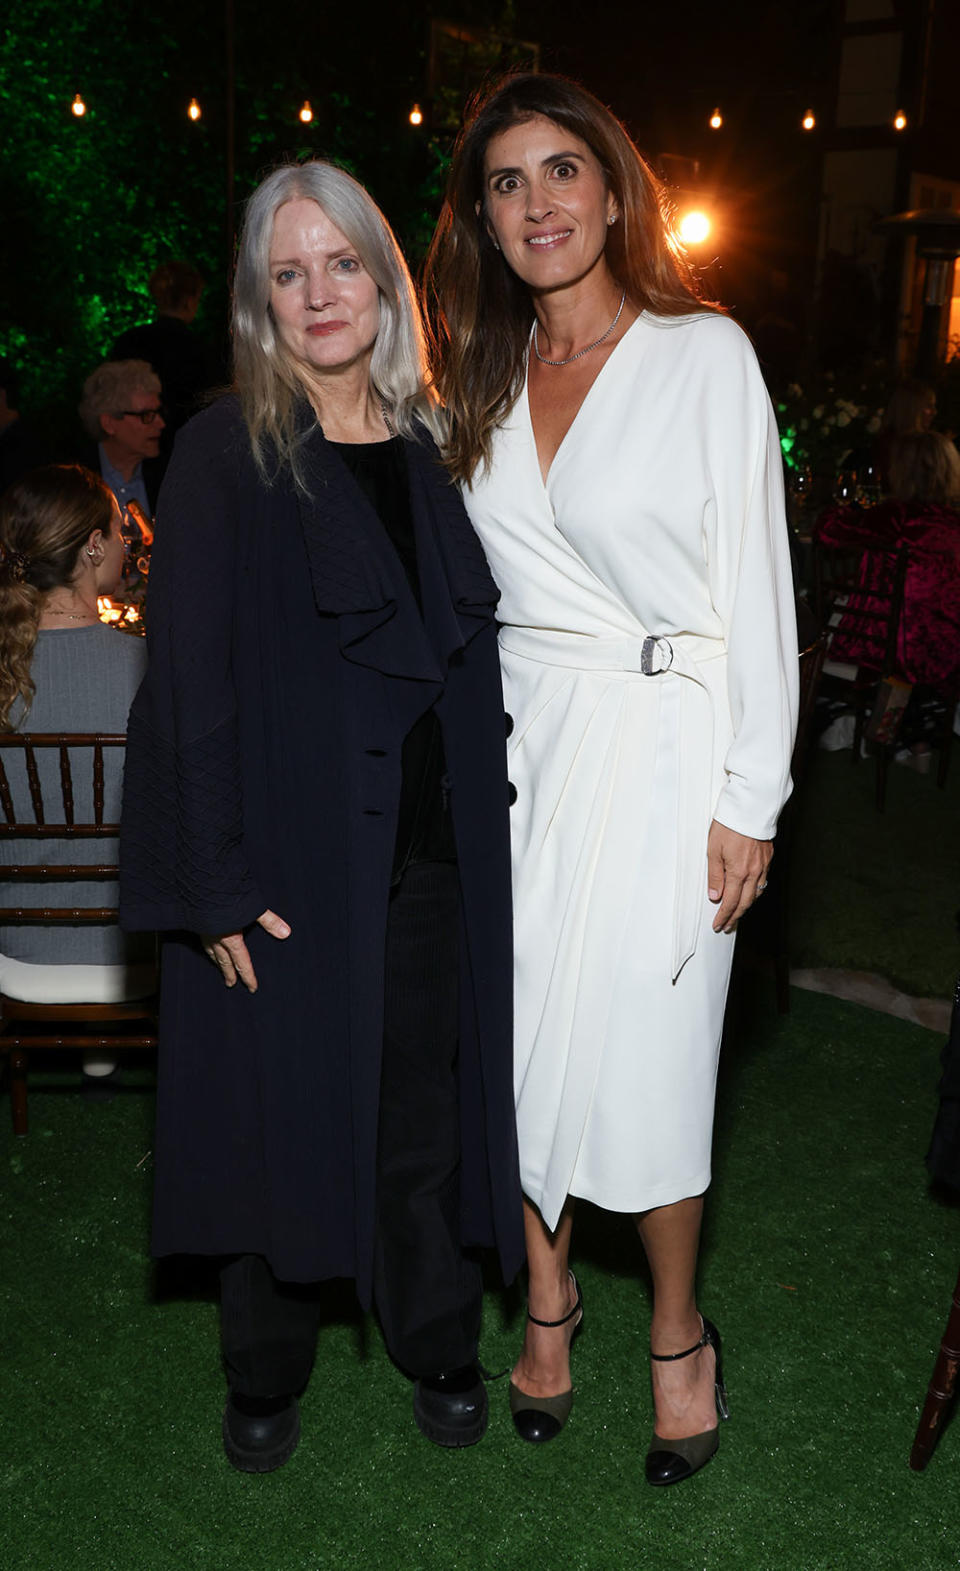 Maggie Baird and Sheila Morovati at the Habits of Waste Annual Sustainability Dinner, October 25, 2023, Santa Monica, California.